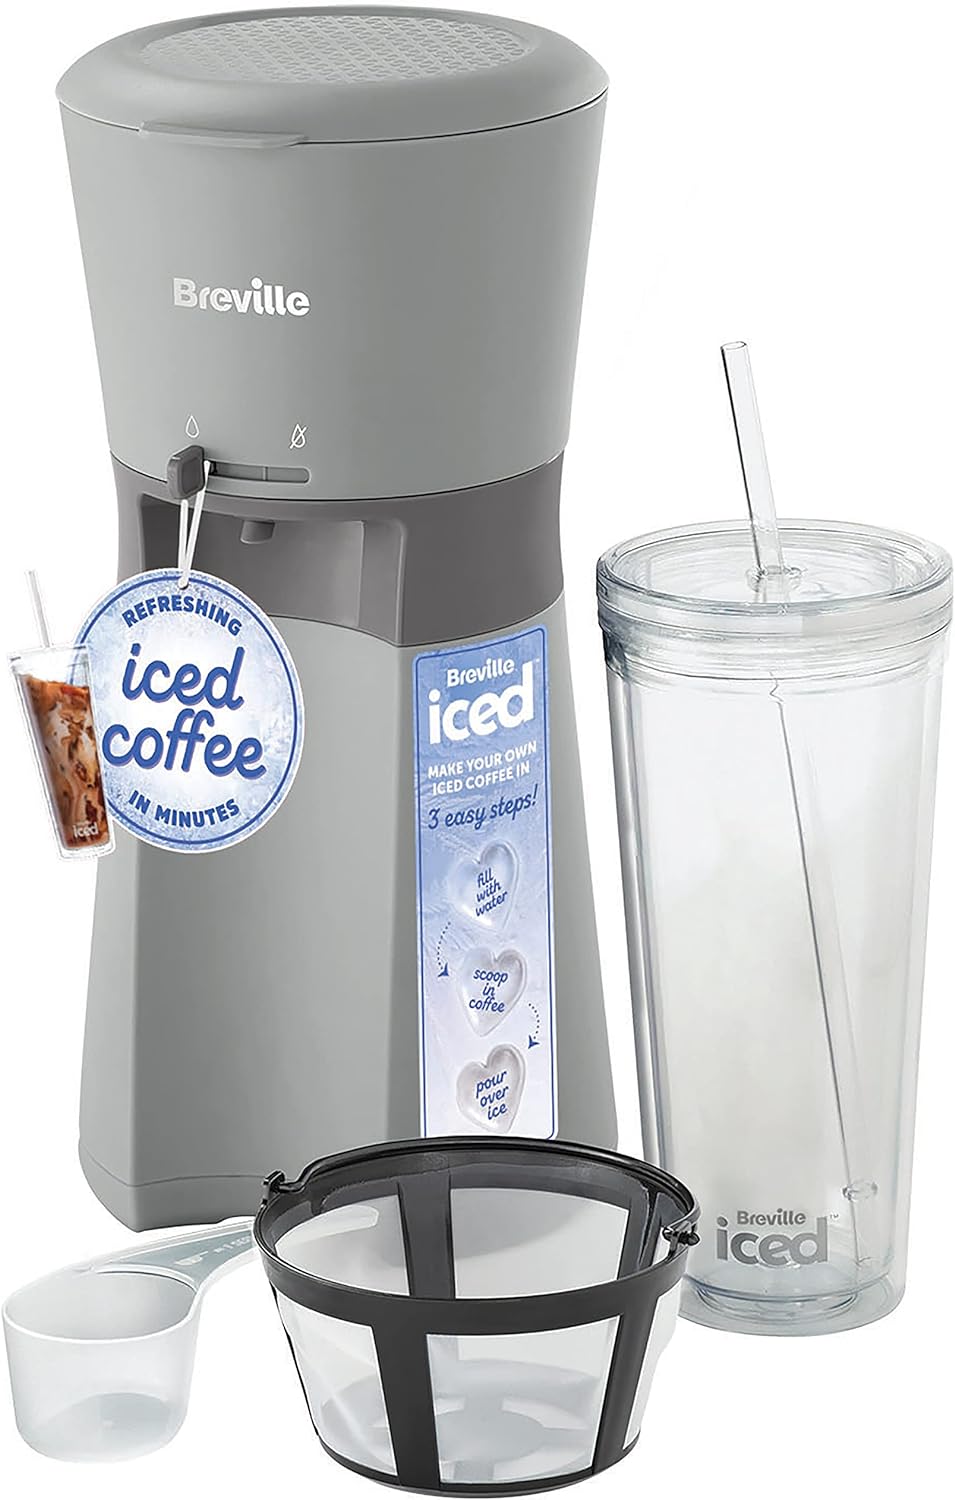 Breville Iced Coffee Maker-4048